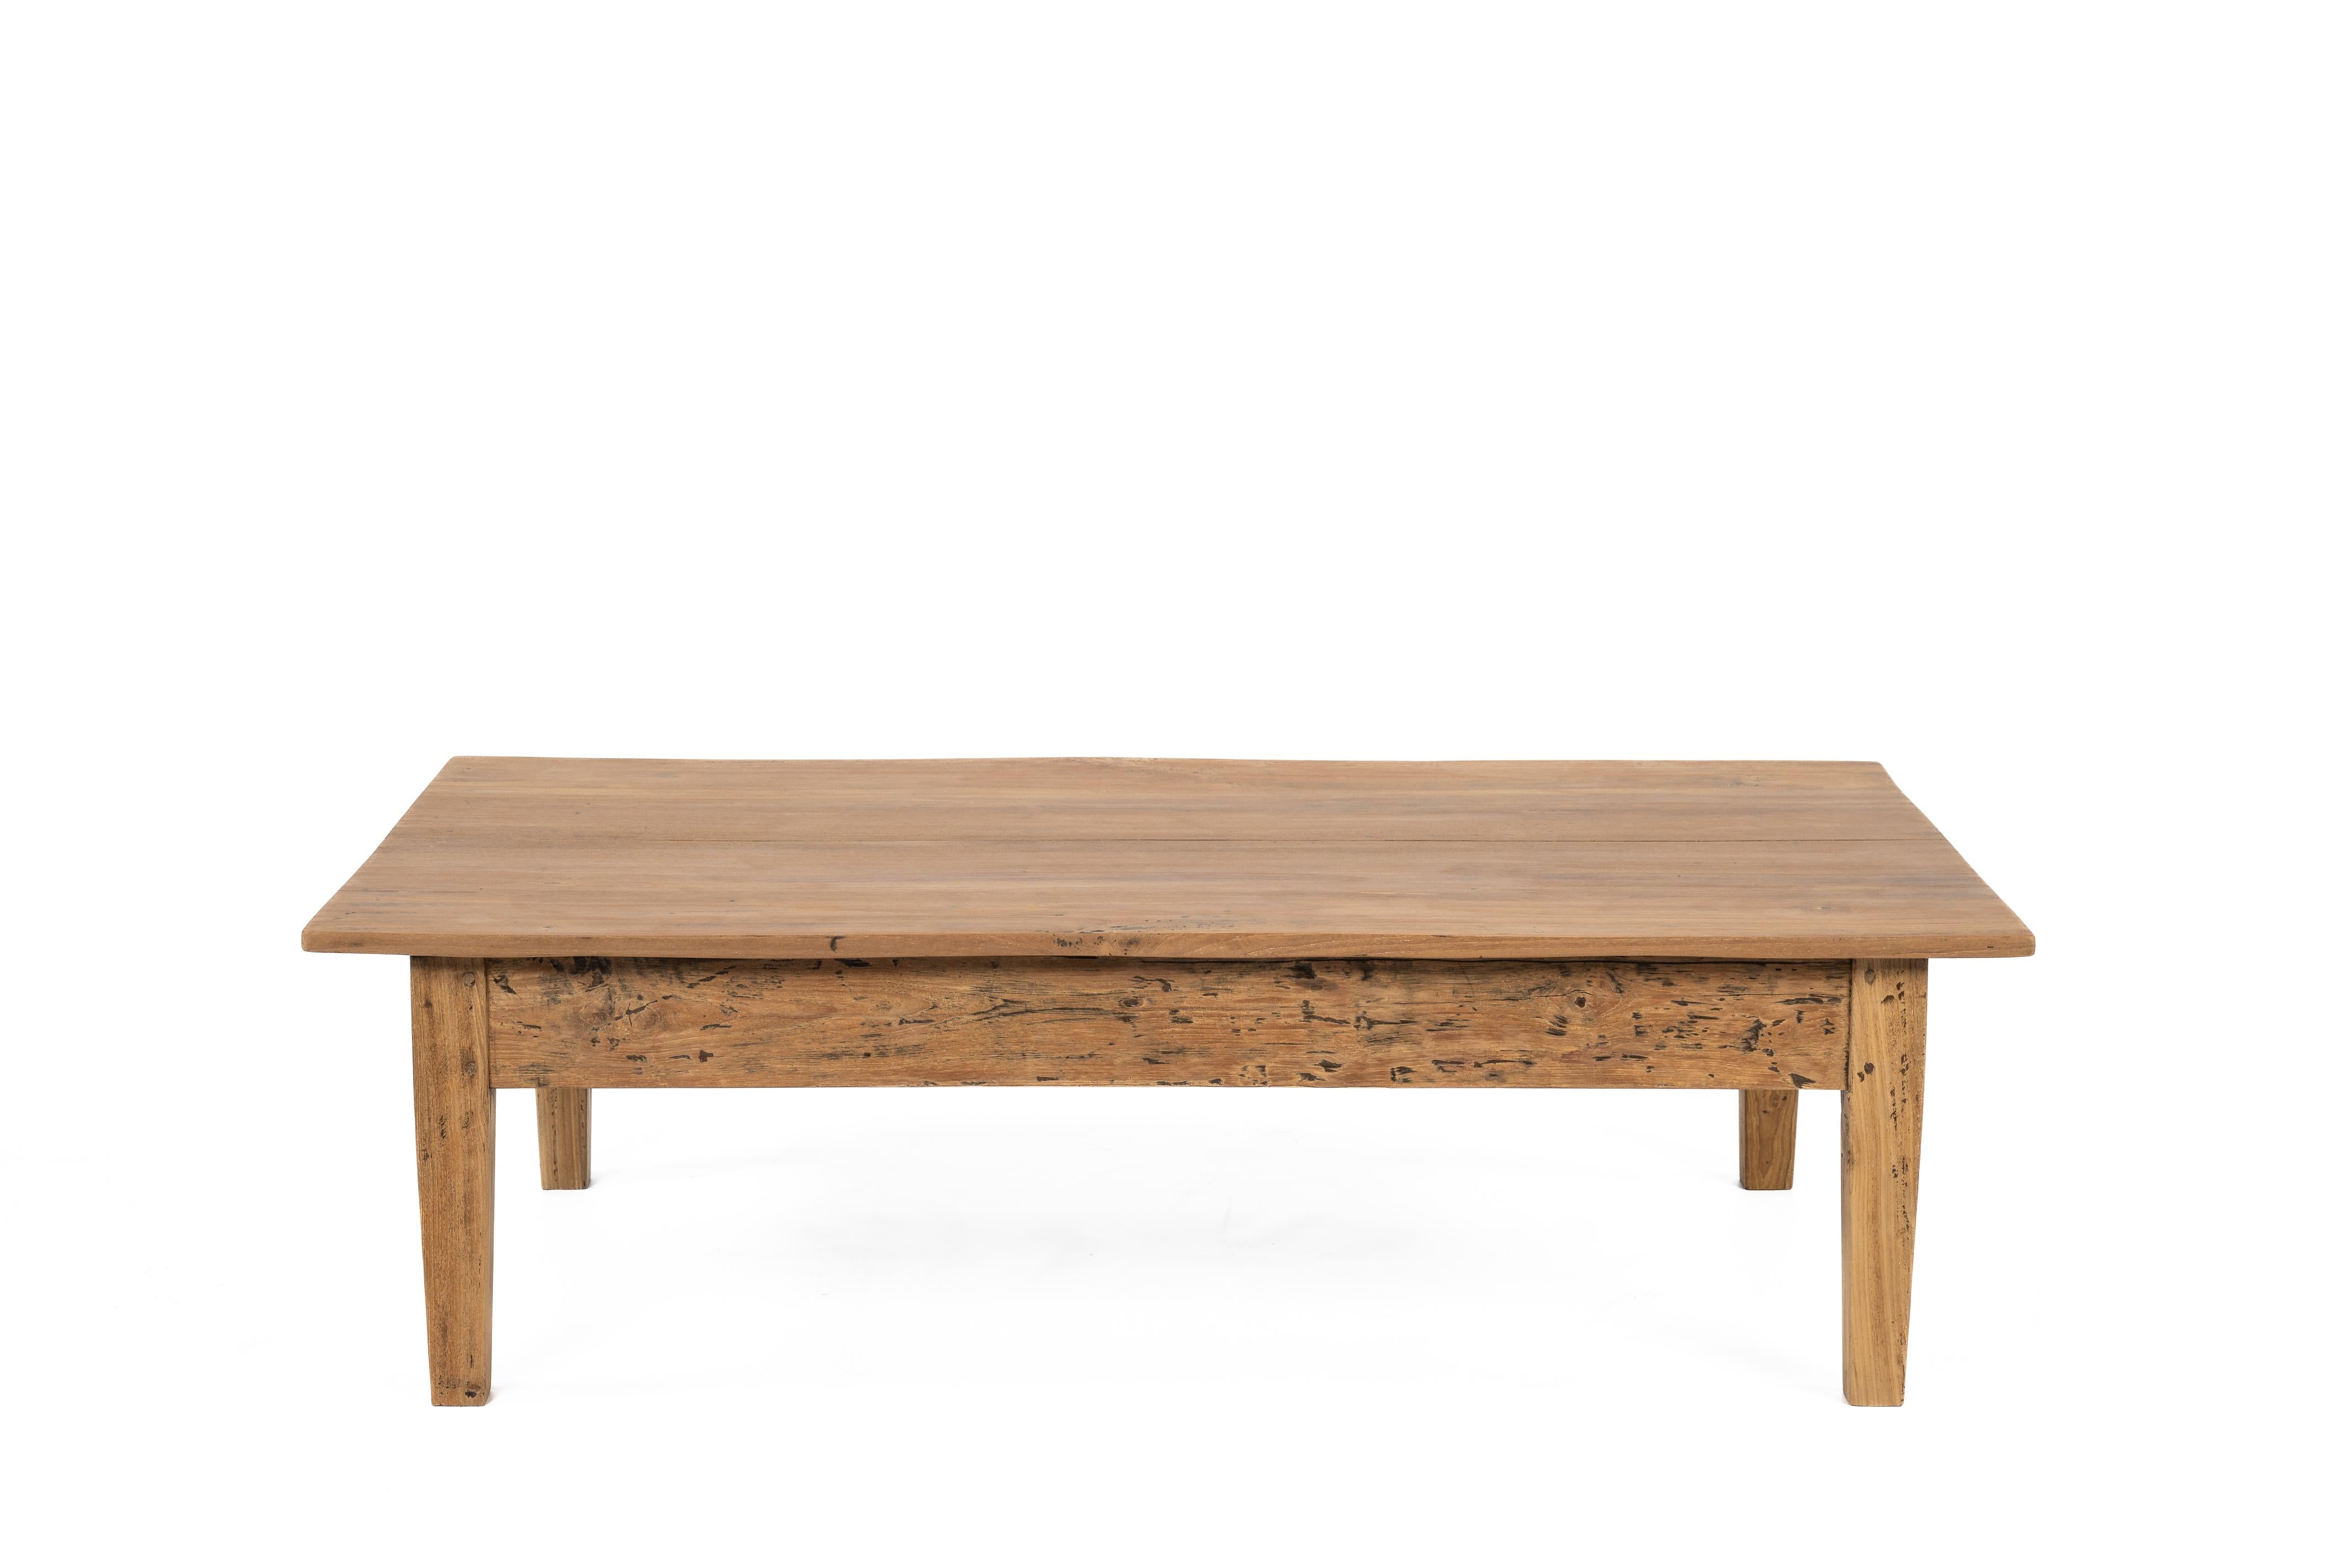 Here presented is a beautiful antique coffee table crafted from teak wood in the early 20th century, circa 1910. The table features a top made of two wide planks. Below it, there is a sleek framework connected by slightly tapered legs. This table